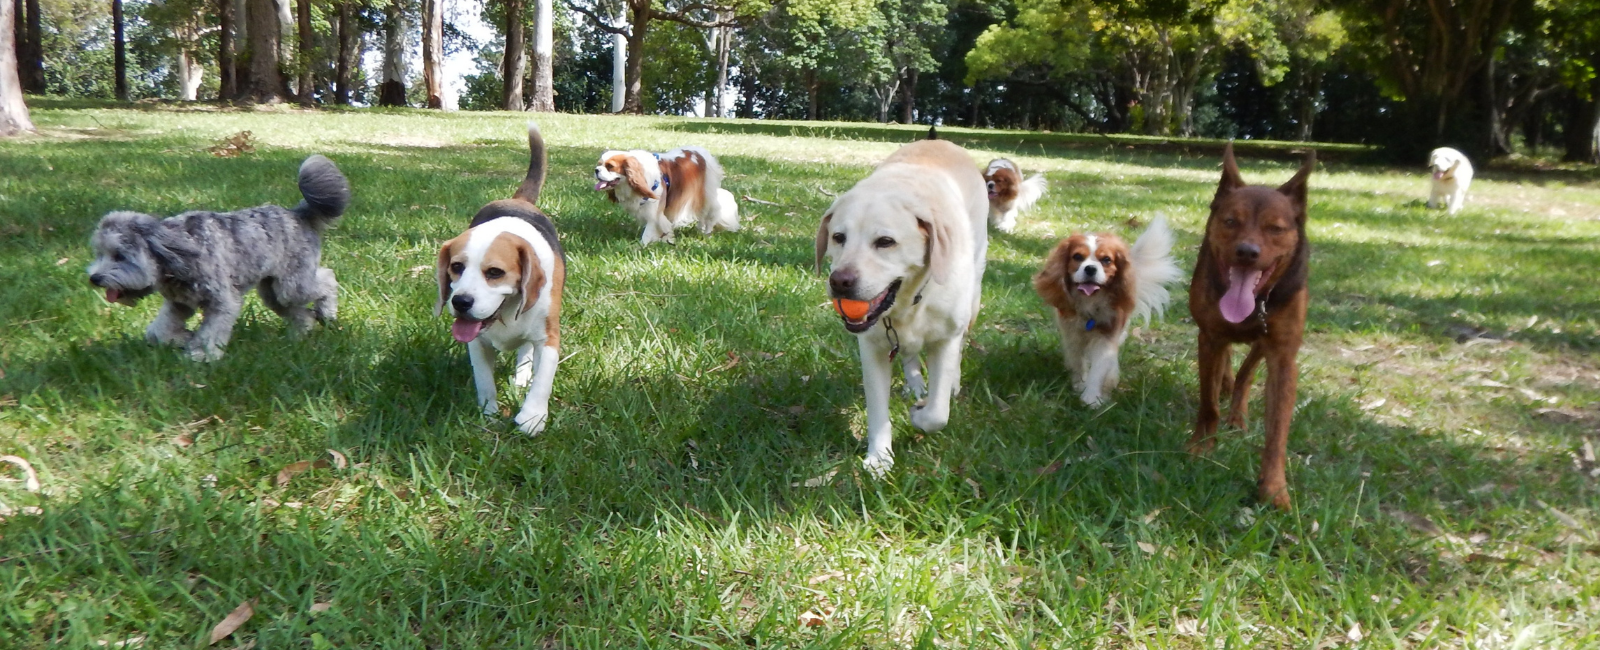 Group of dogs playing at a dog park